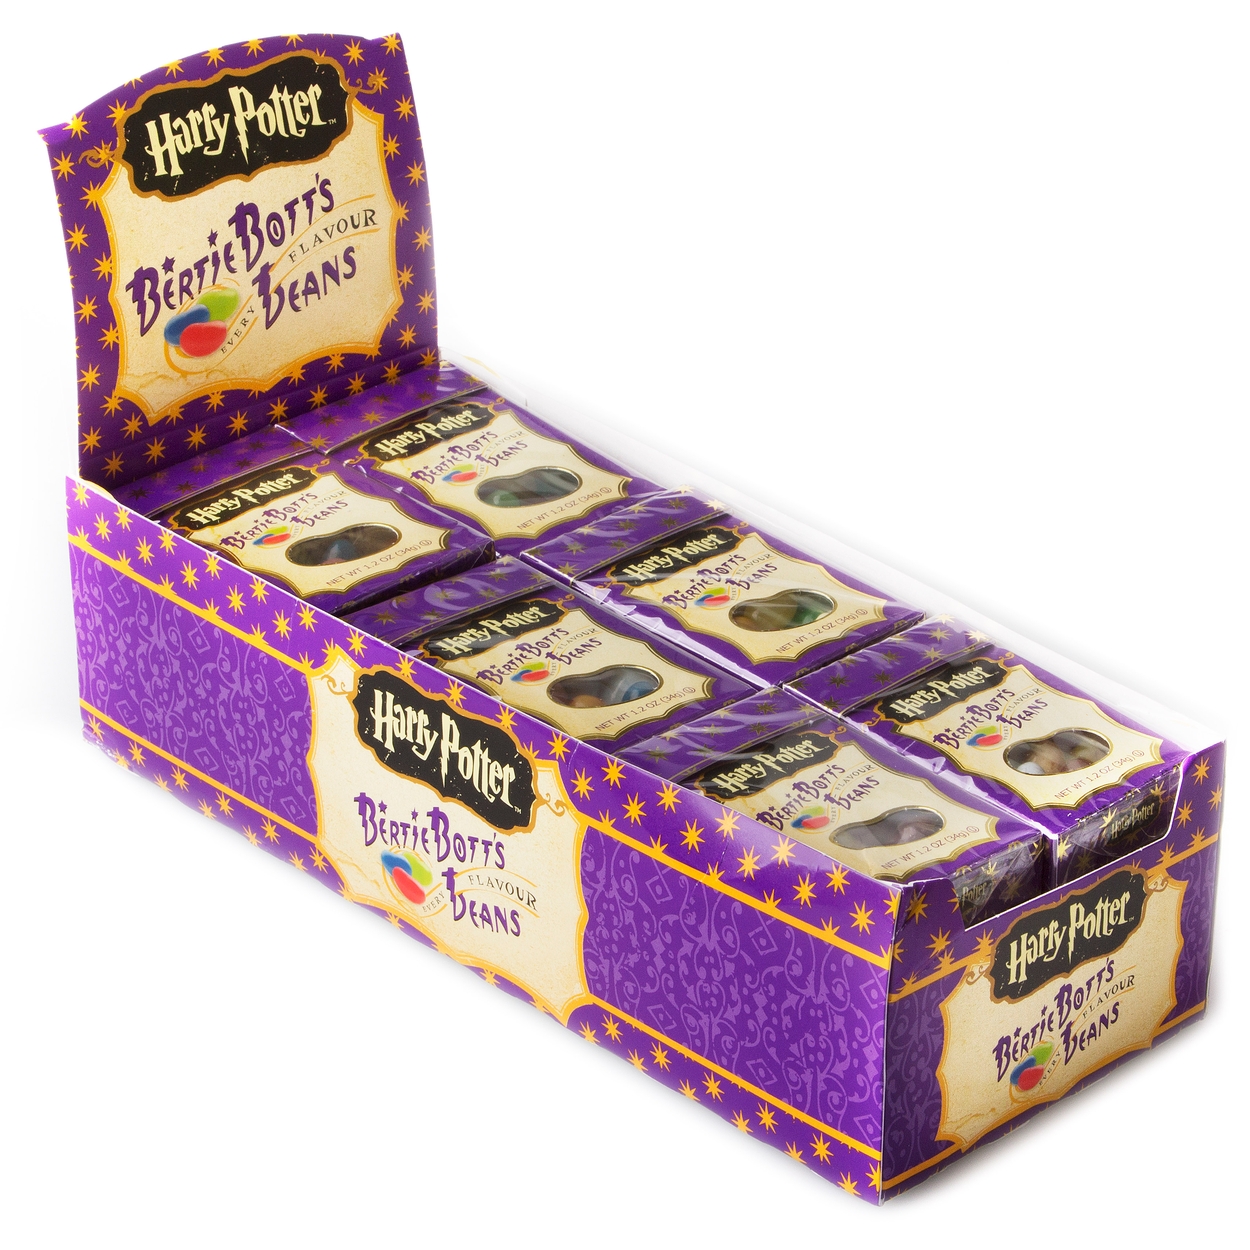 Harry Potter Bertie Bott's 'Every Flavour' Jelly Beans - 24CT Box